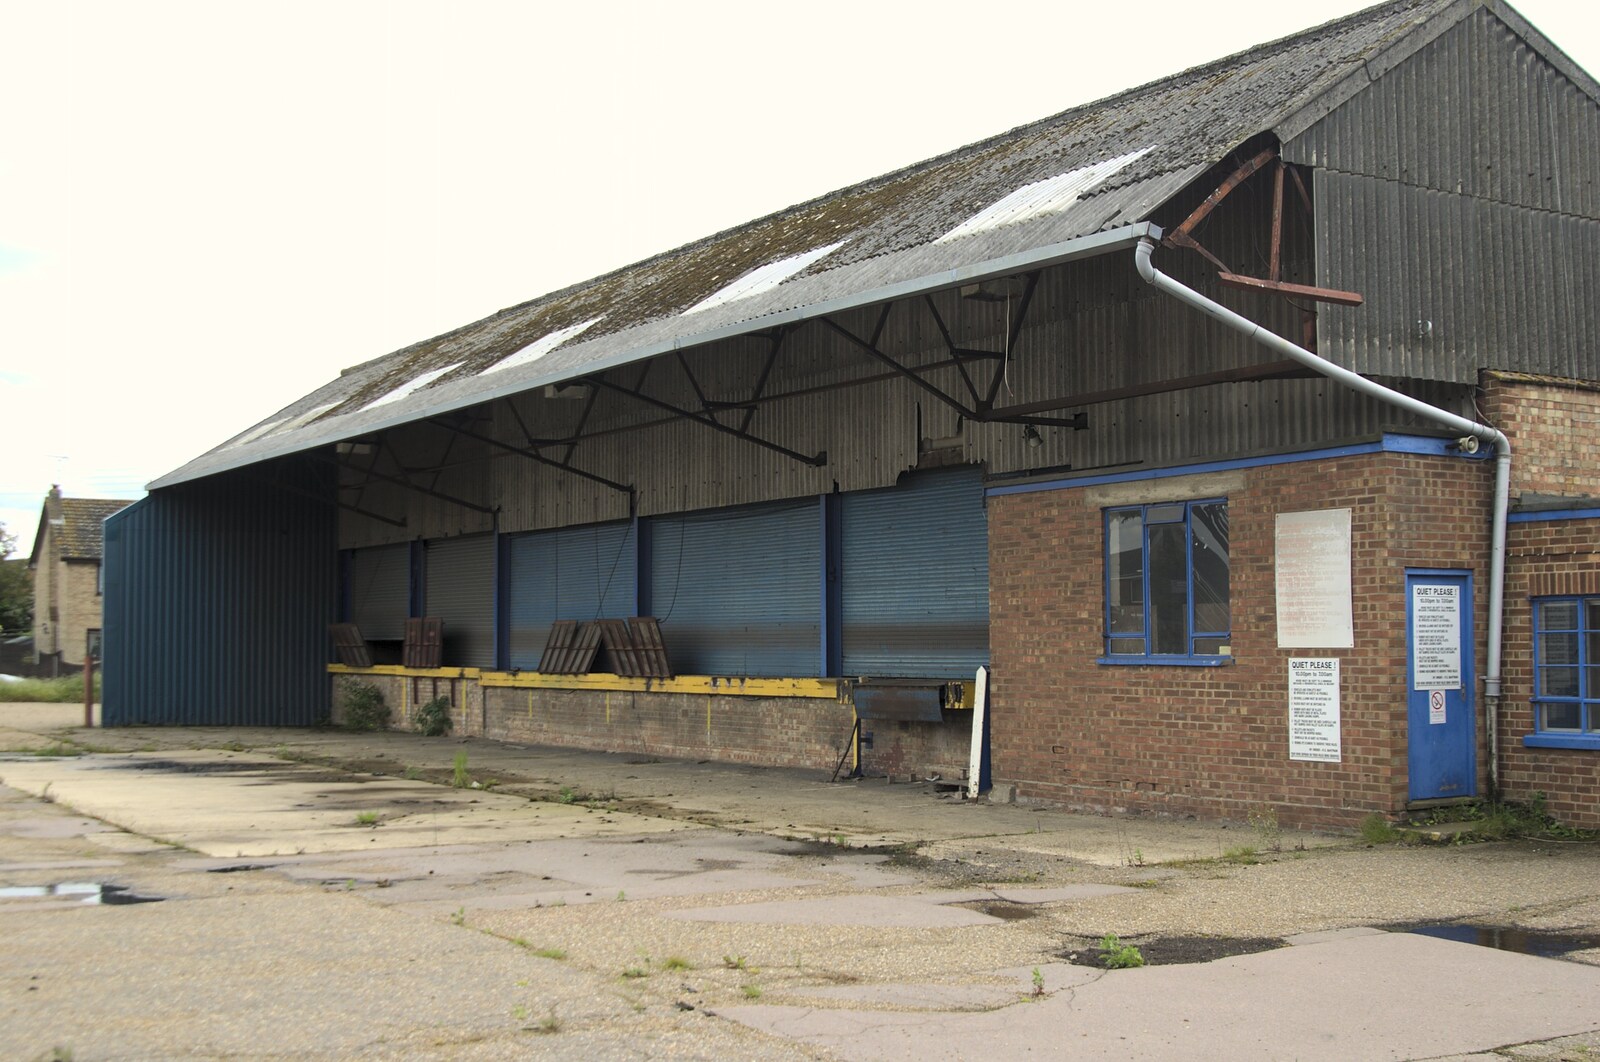 The old loading shed from The BBs at Bridgham, and Bartrum's Dereliction, Diss, Norfolk - 25th May 2009